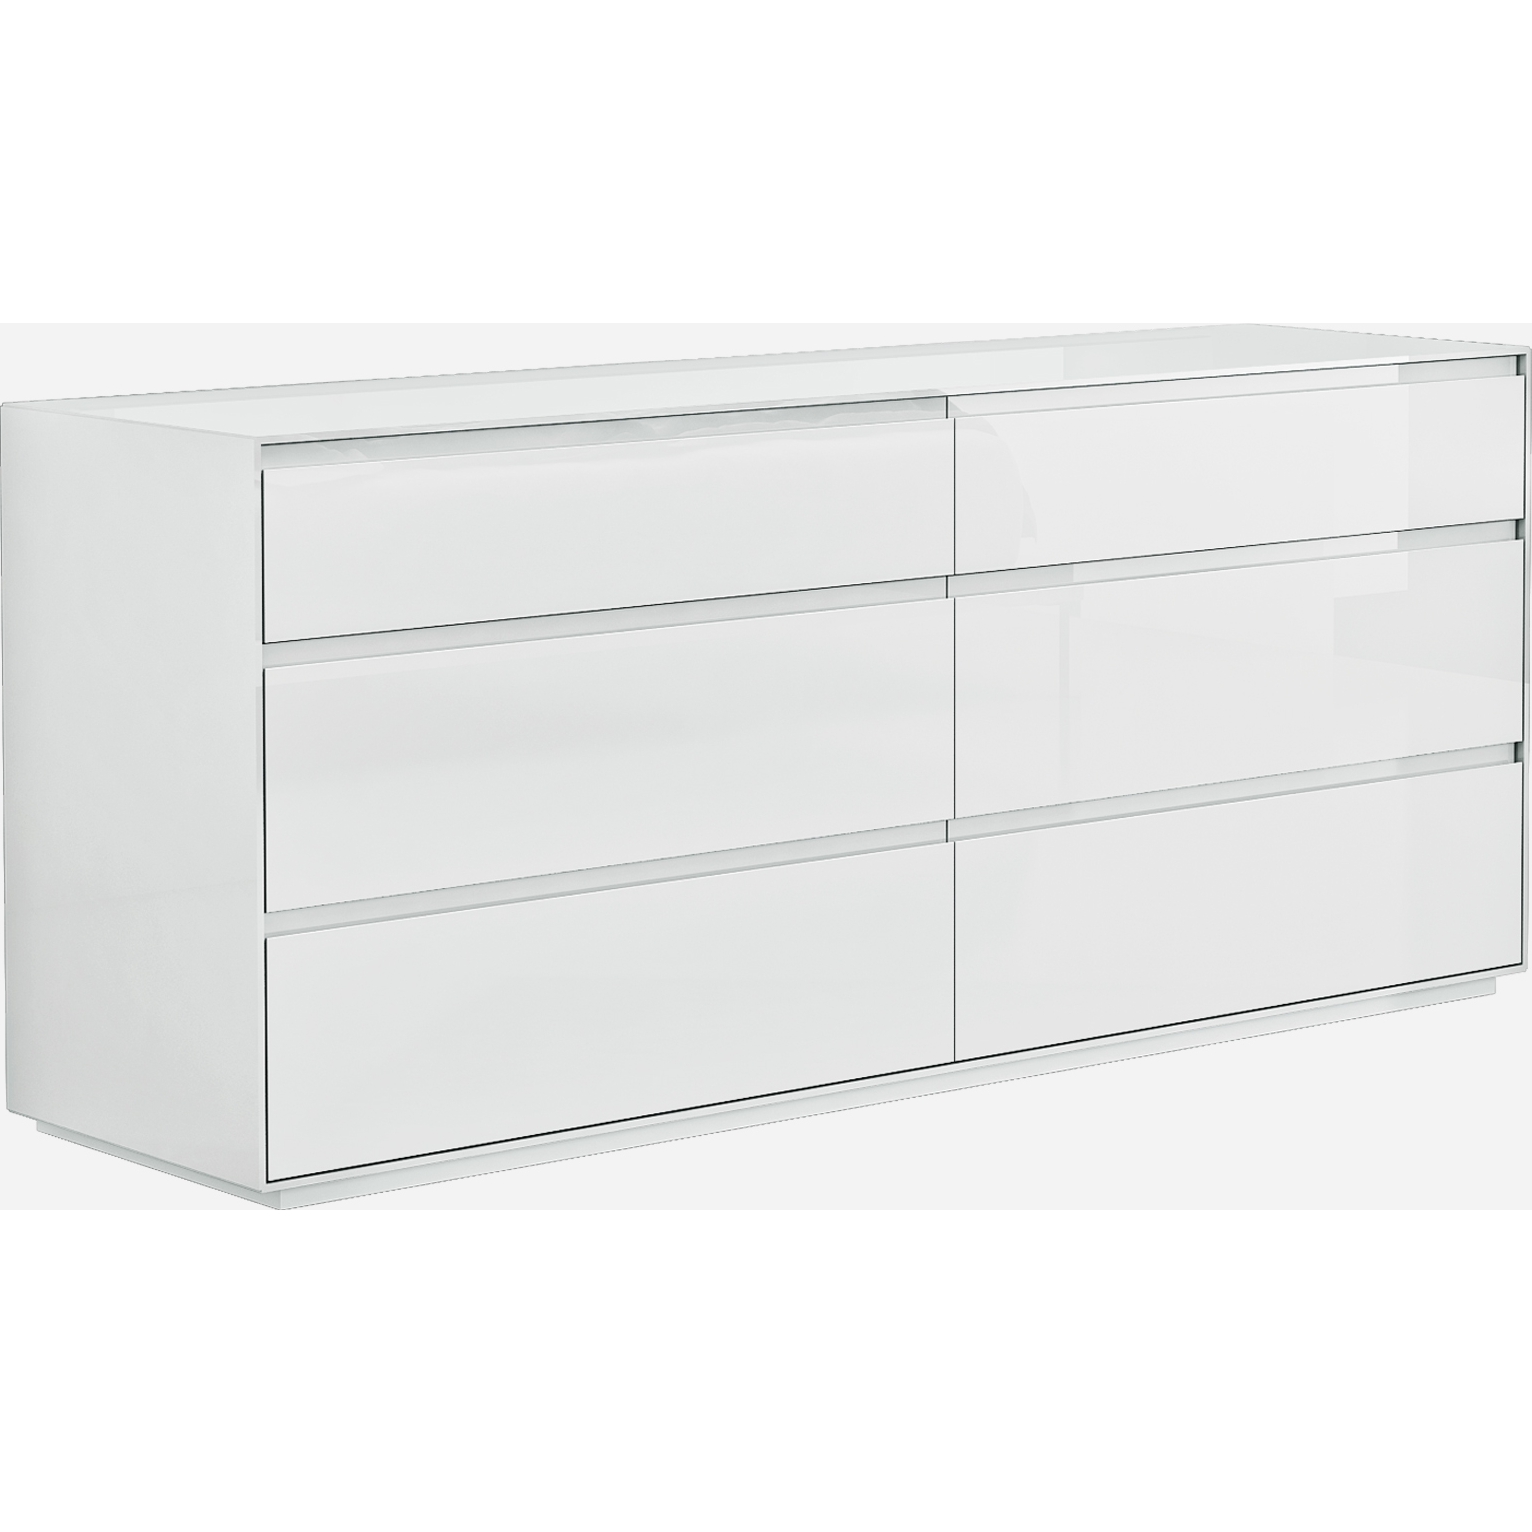 W36" D19" H48" Details about   Whiteline Malibu Chest Of Drawers CD1367-GRY Brand New 